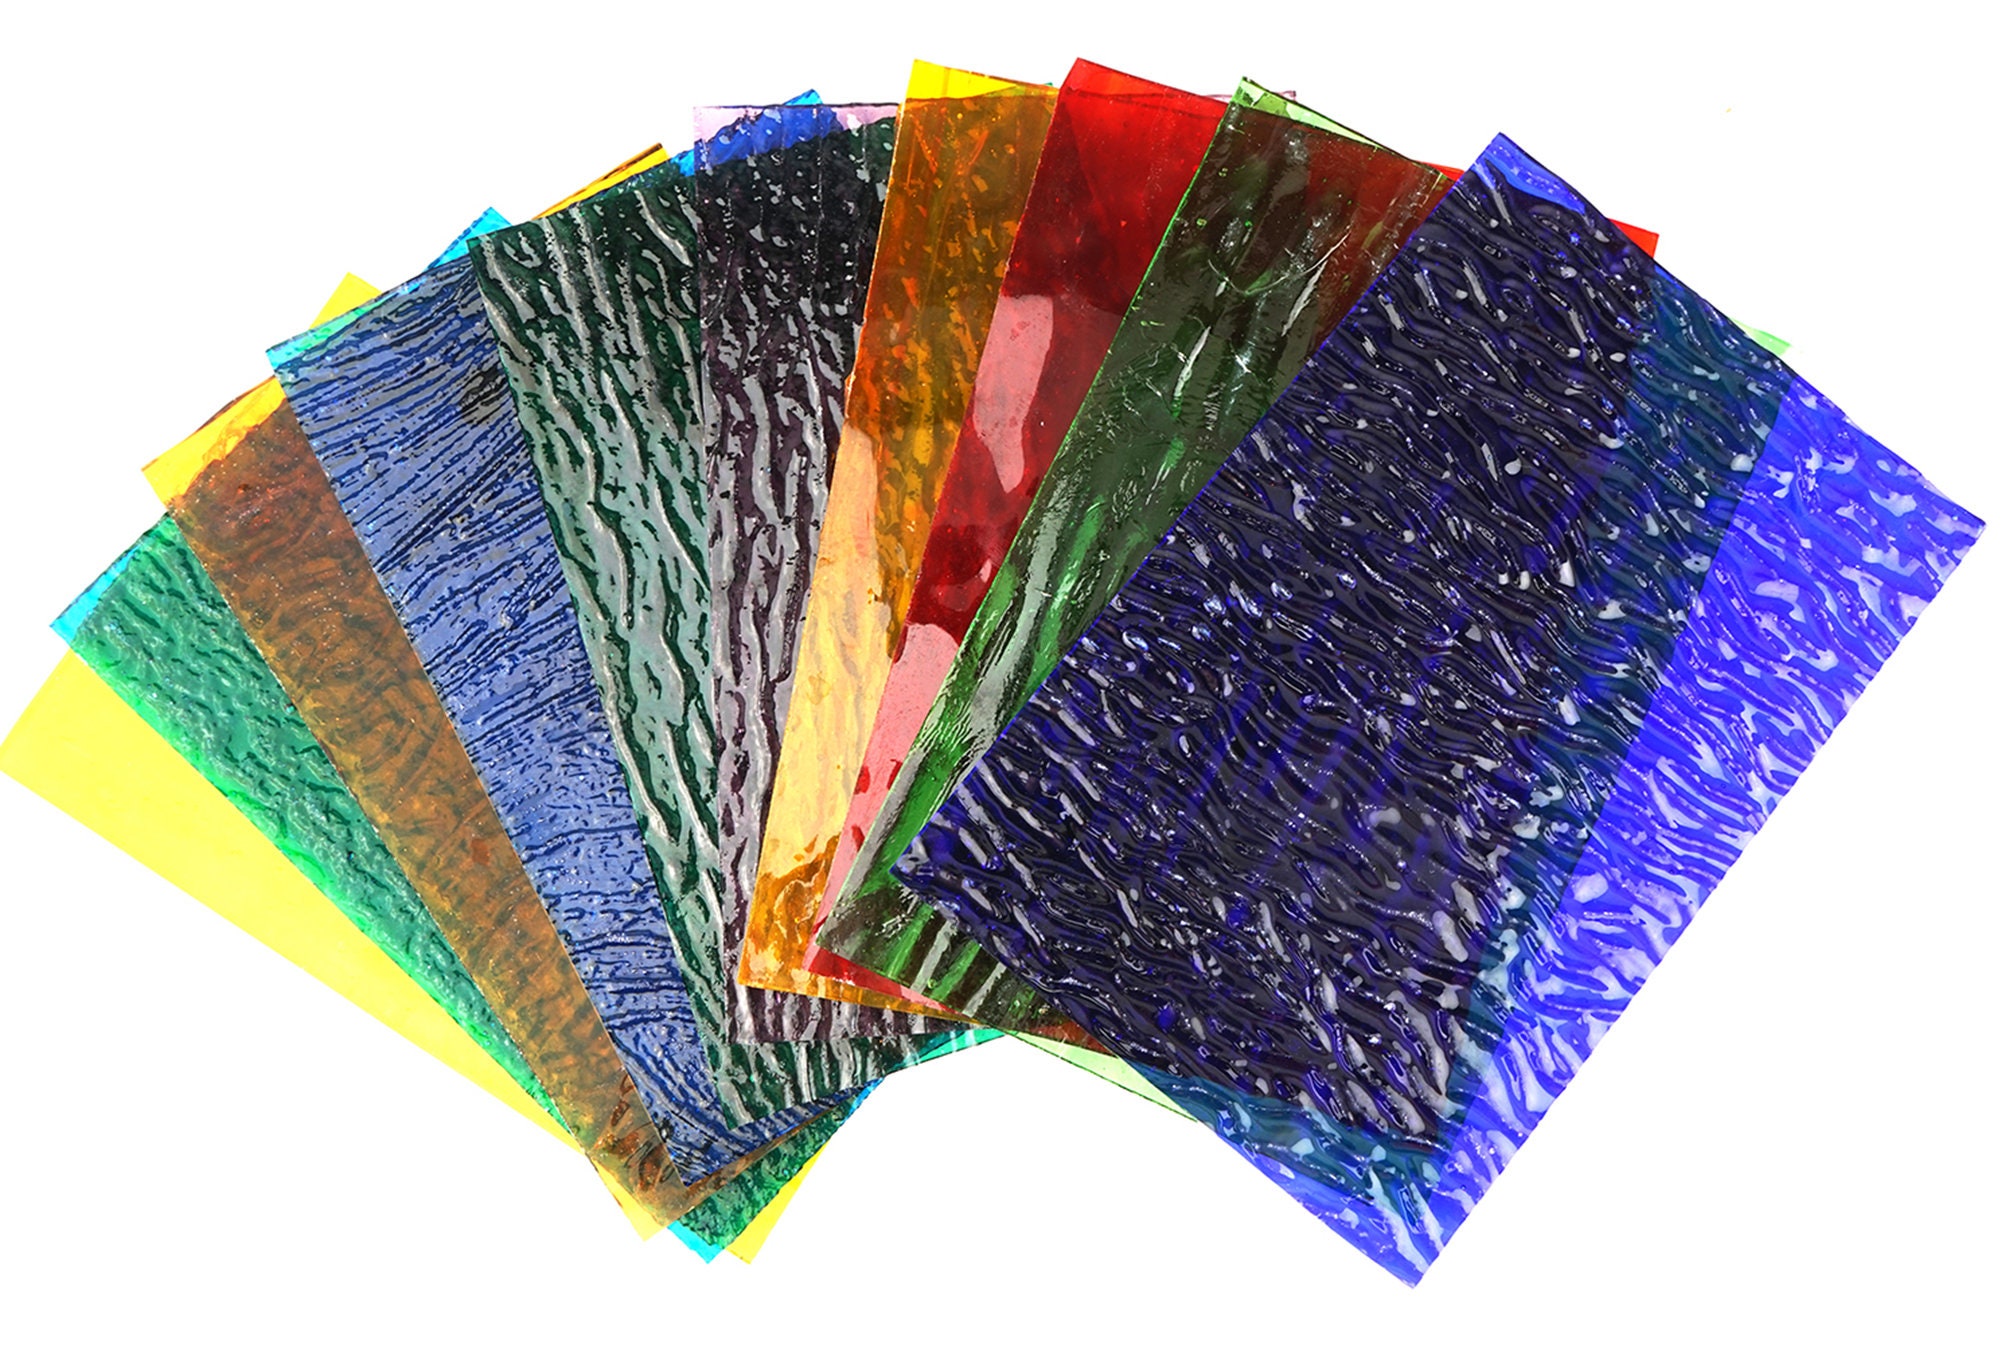 NUODITOS 12 Sheets Stained Glass Sheets, 4X 6 Cathedral Glass Art Glass,  Mosaic Glass Tiles for Crafts (Mixed Transparent)